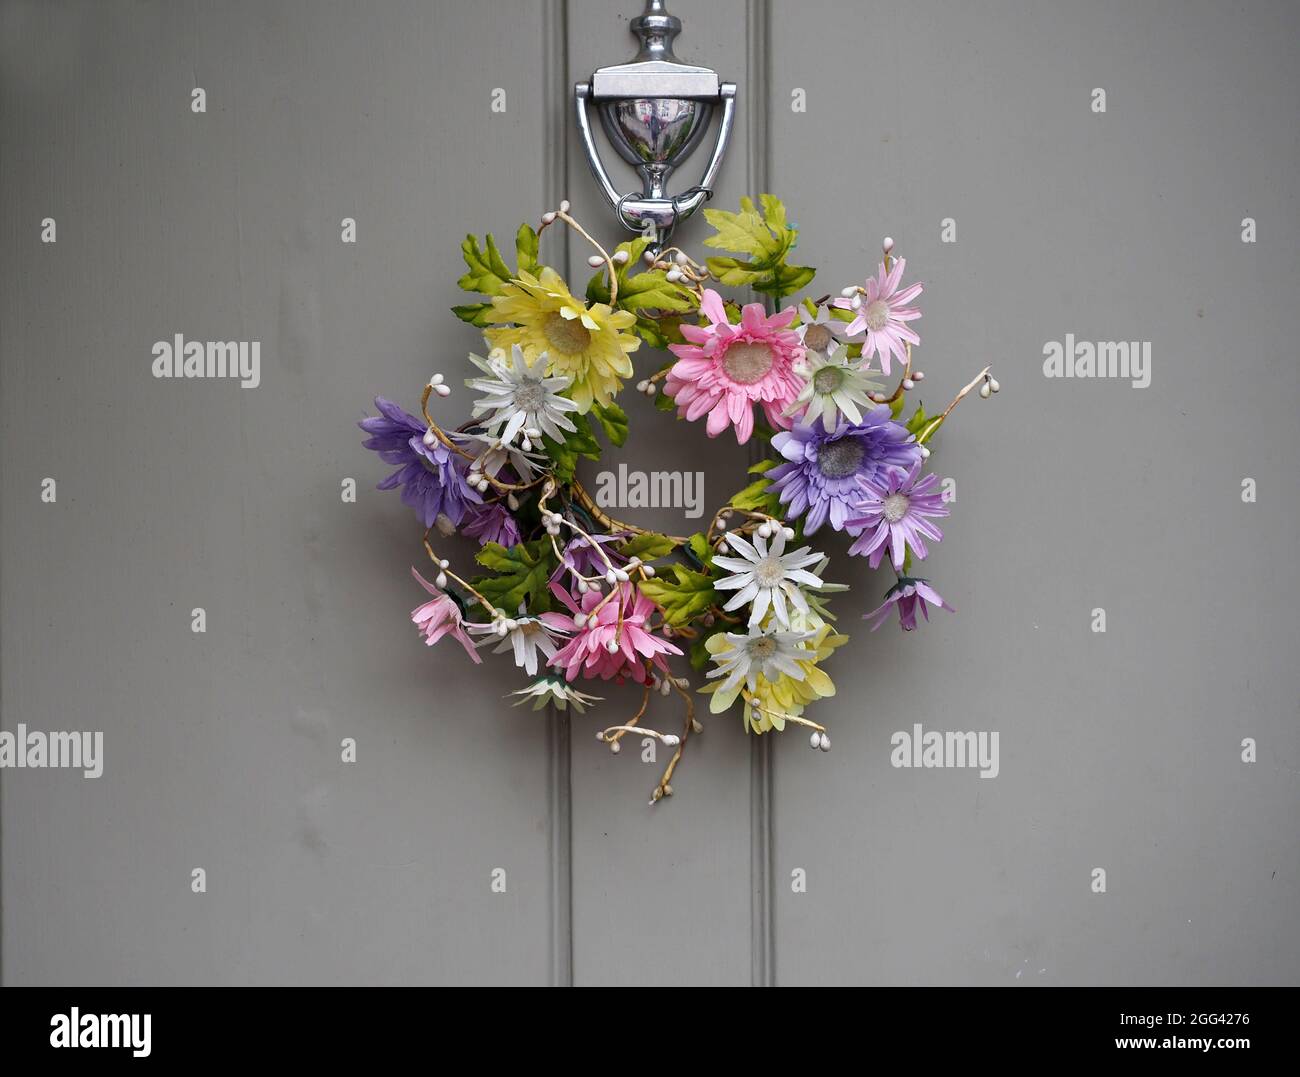 A galand of colourful flowers hanging from a grey door Stock Photo